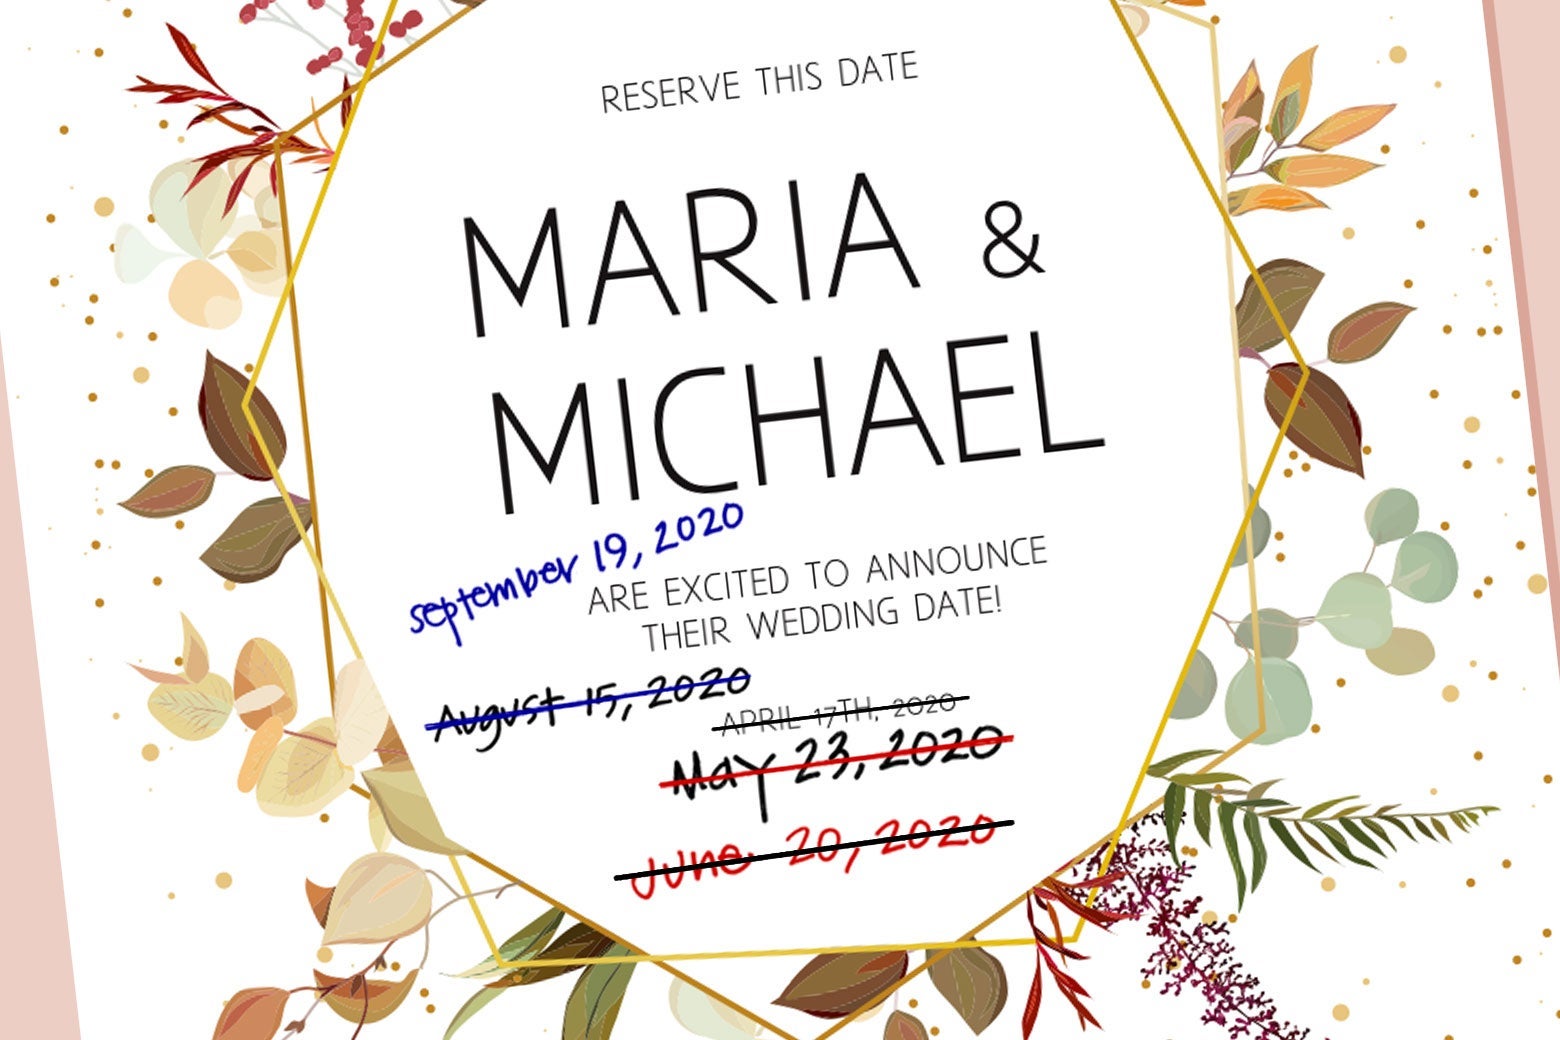 A save the date with a ton of dates crossed out and rescheduled. 